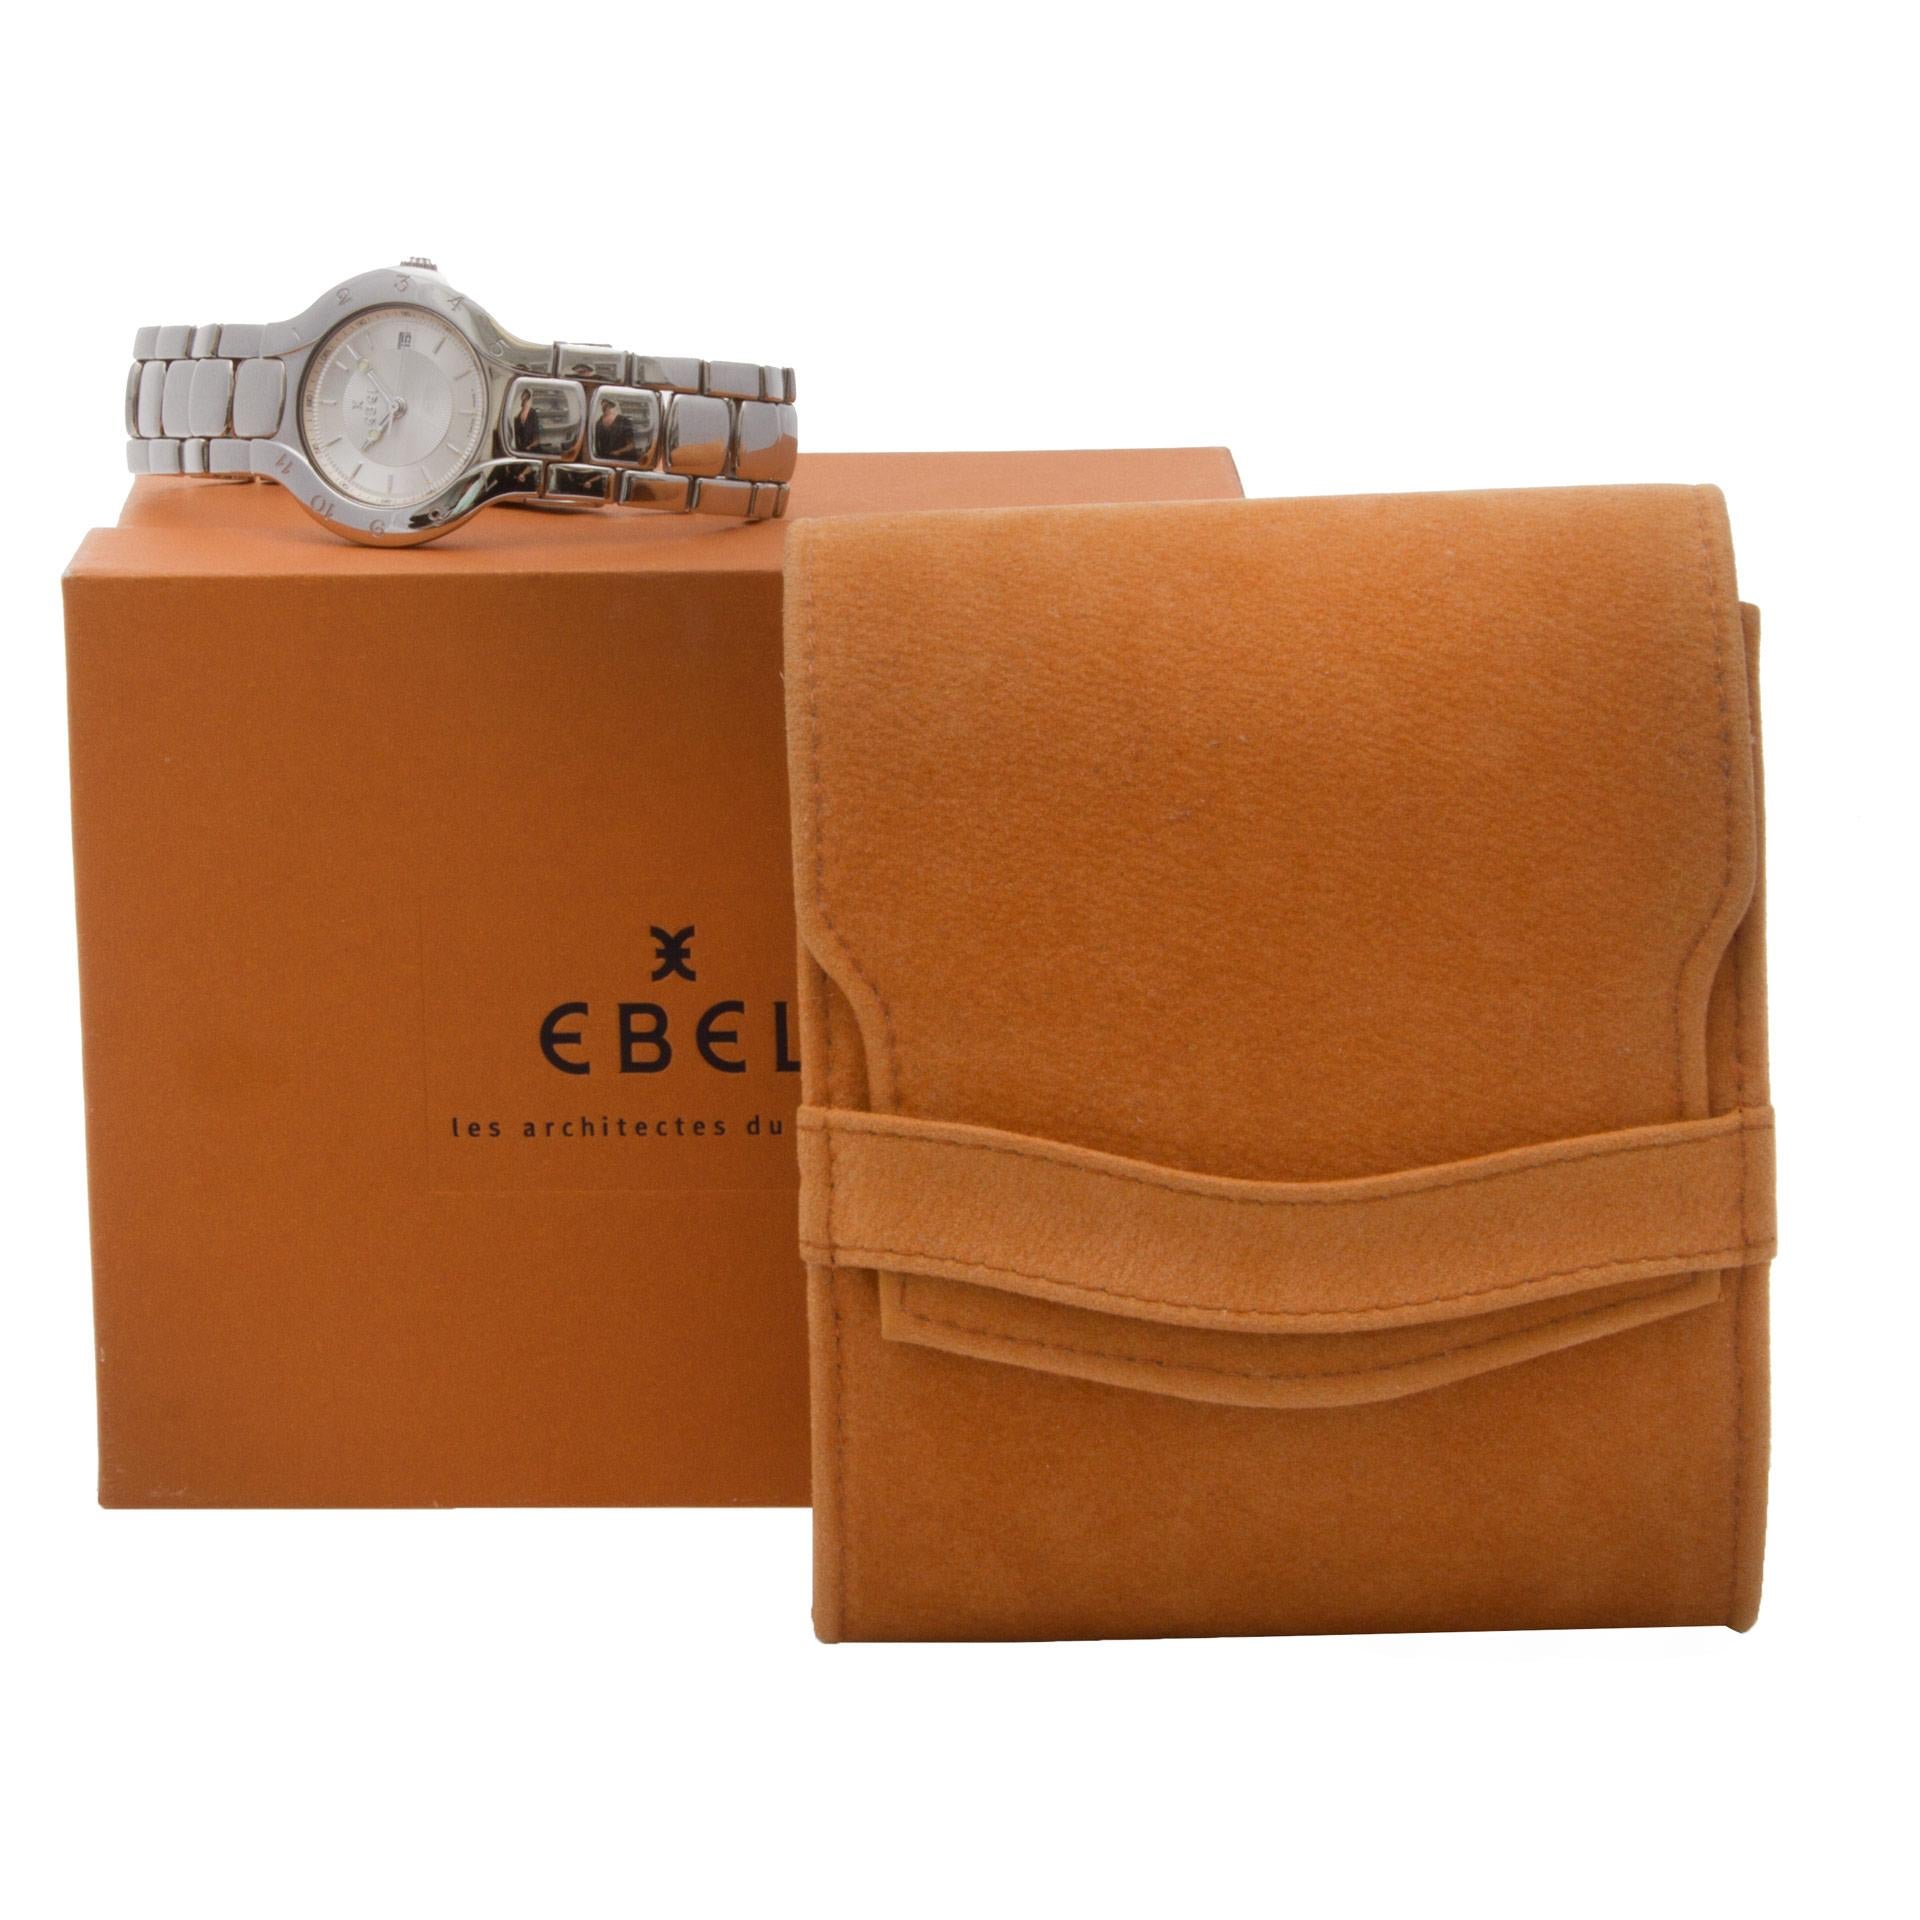 ebel watch for sale